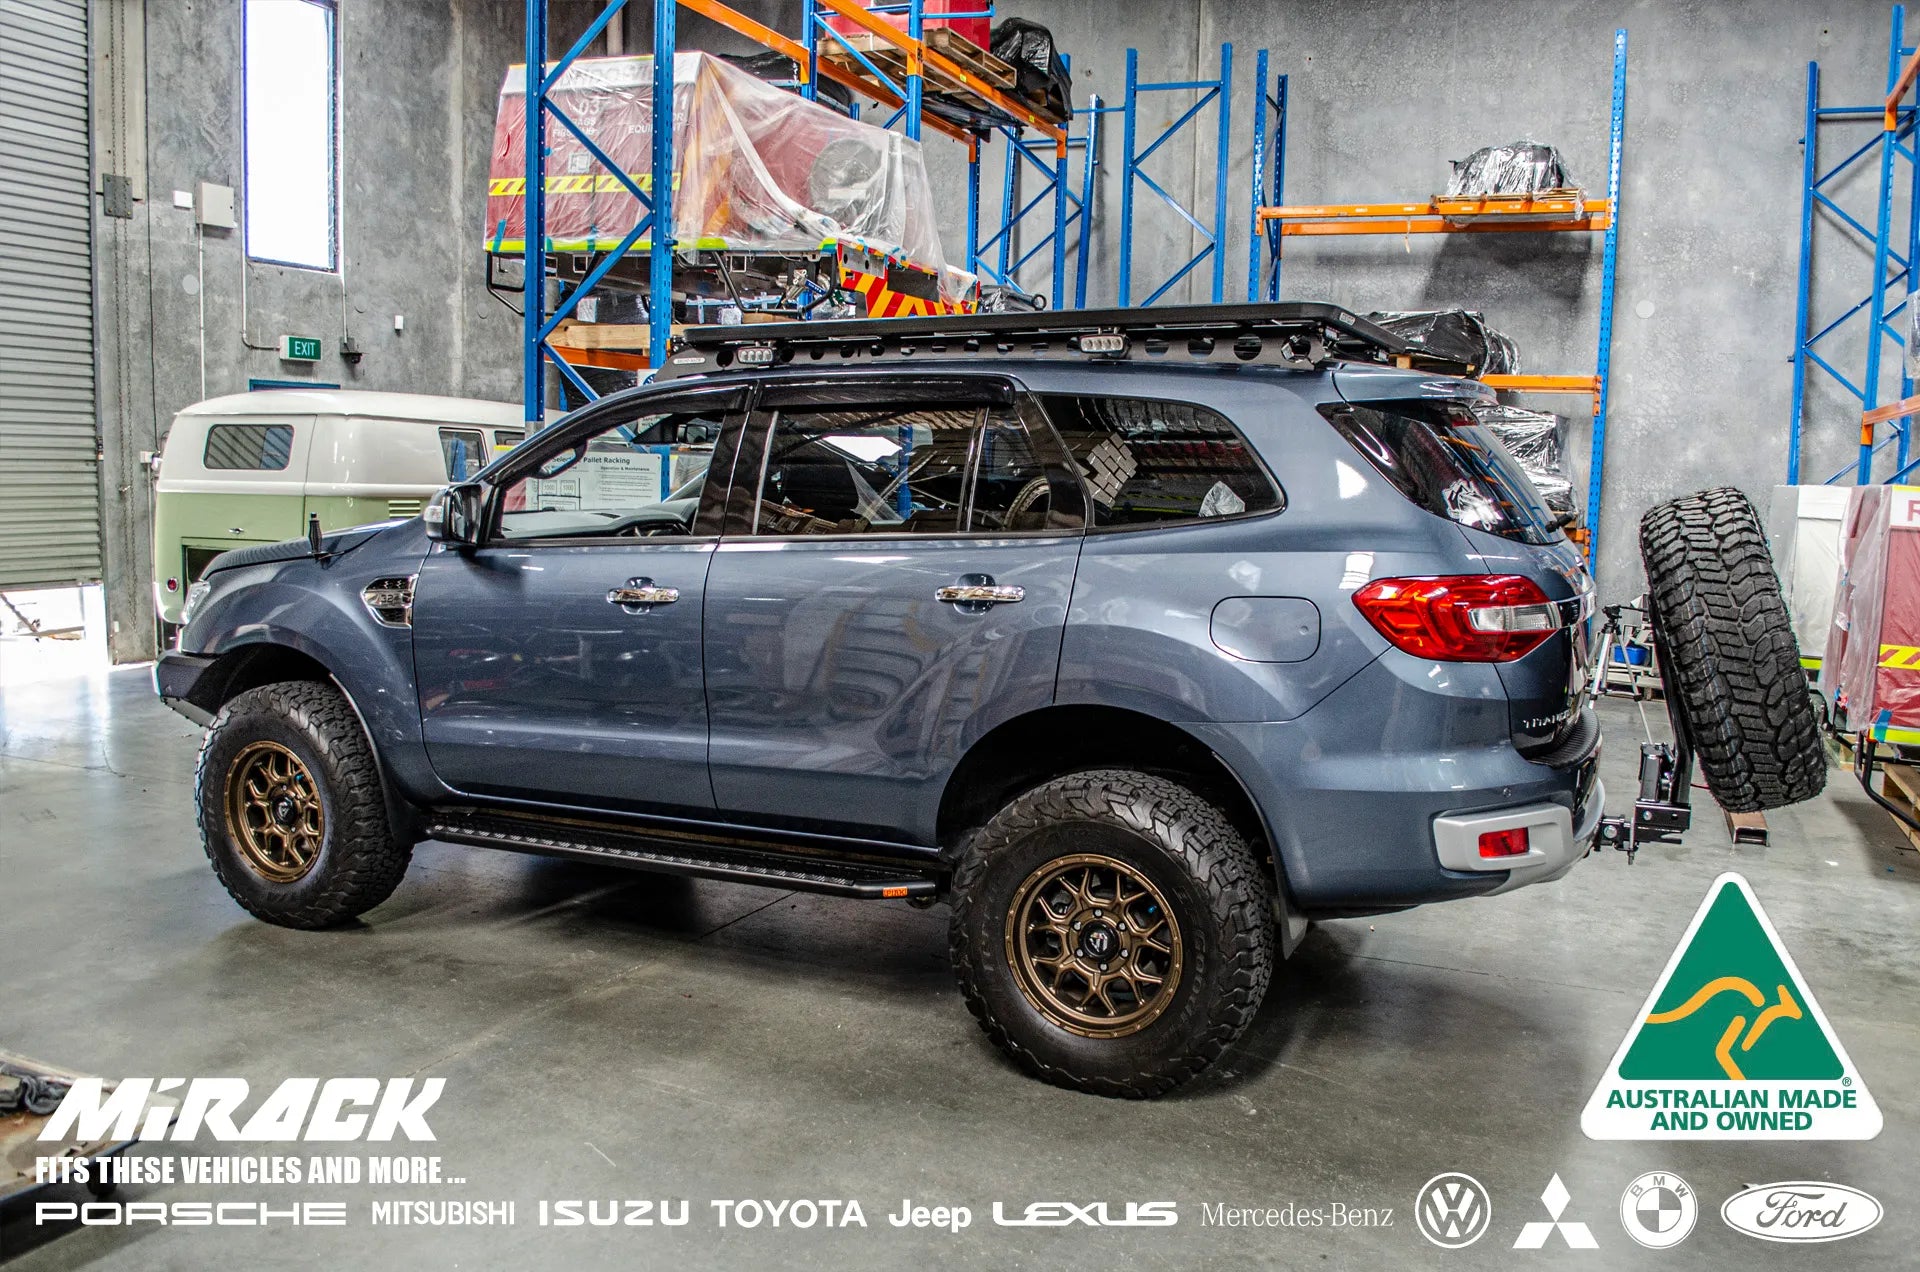 Ford Everest aftermarket upgrade: Mirack's innovative tilting spare tyre carrier for improved rear functionality and enhanced off-roading.